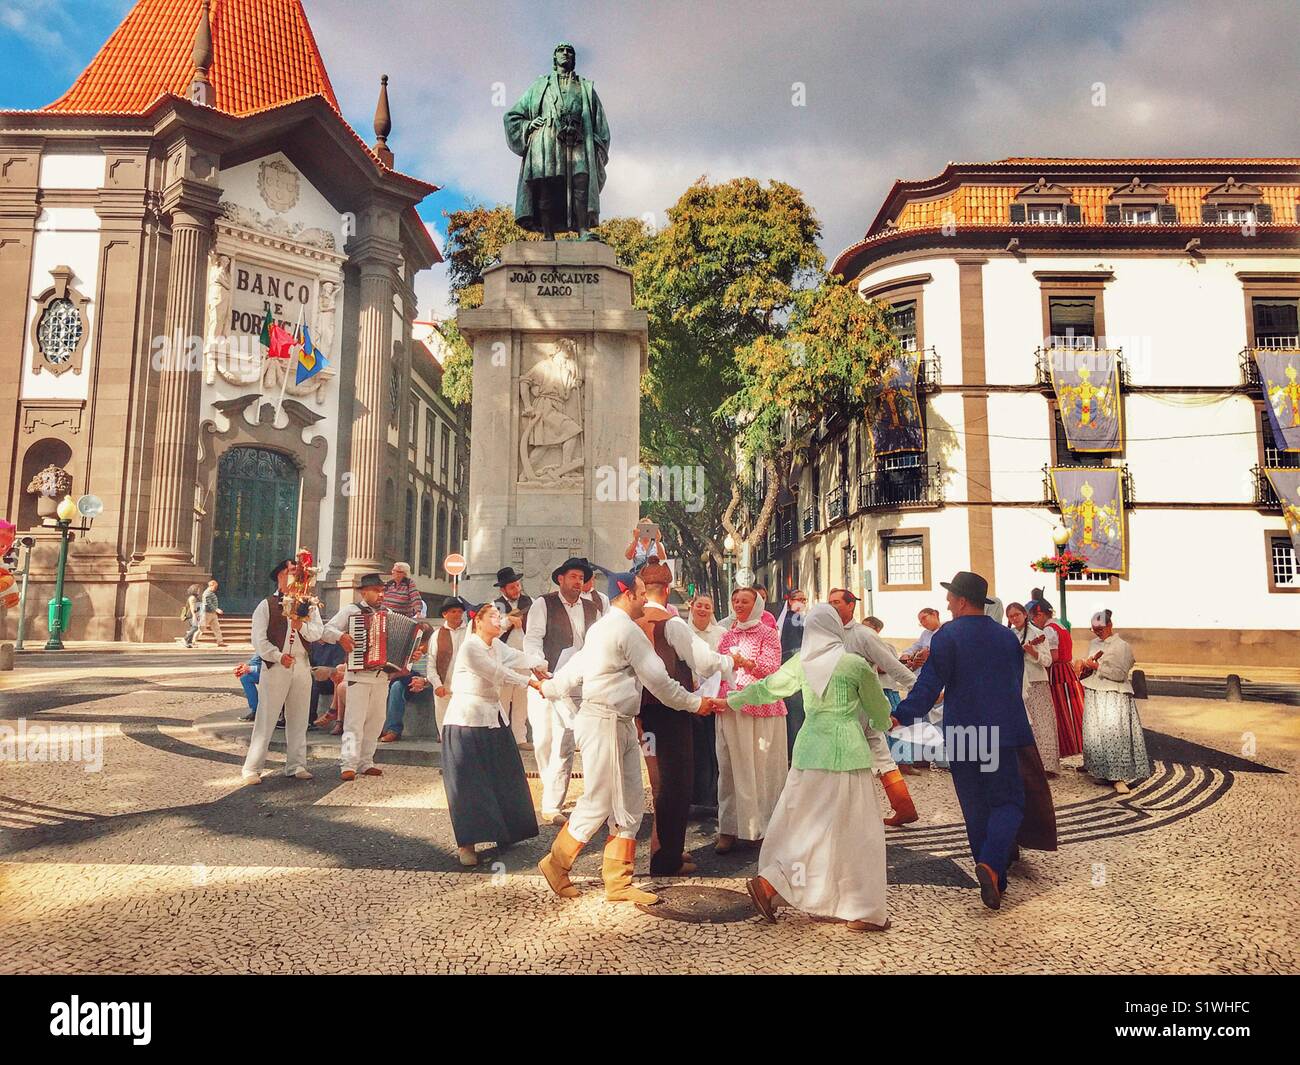 Folk musicians and dancers performing in front of the statue of Zarco, with the iconic Bank of Portugal in the background. Funchal, Madeira, Portugal Stock Photo